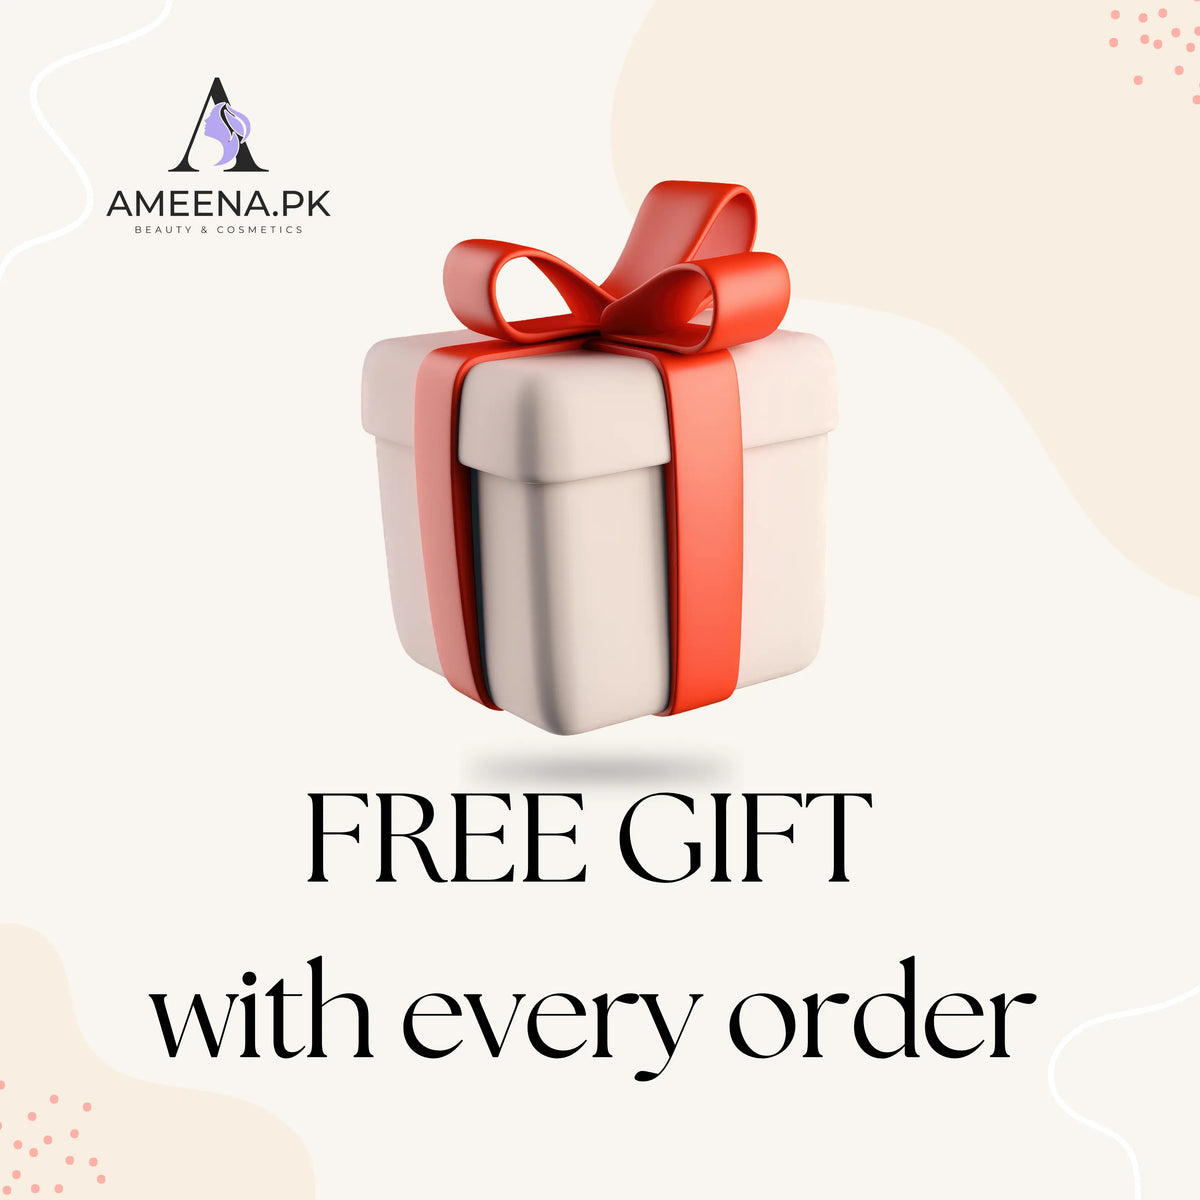 Free GIFT ON EID FROM AMEENA.PK